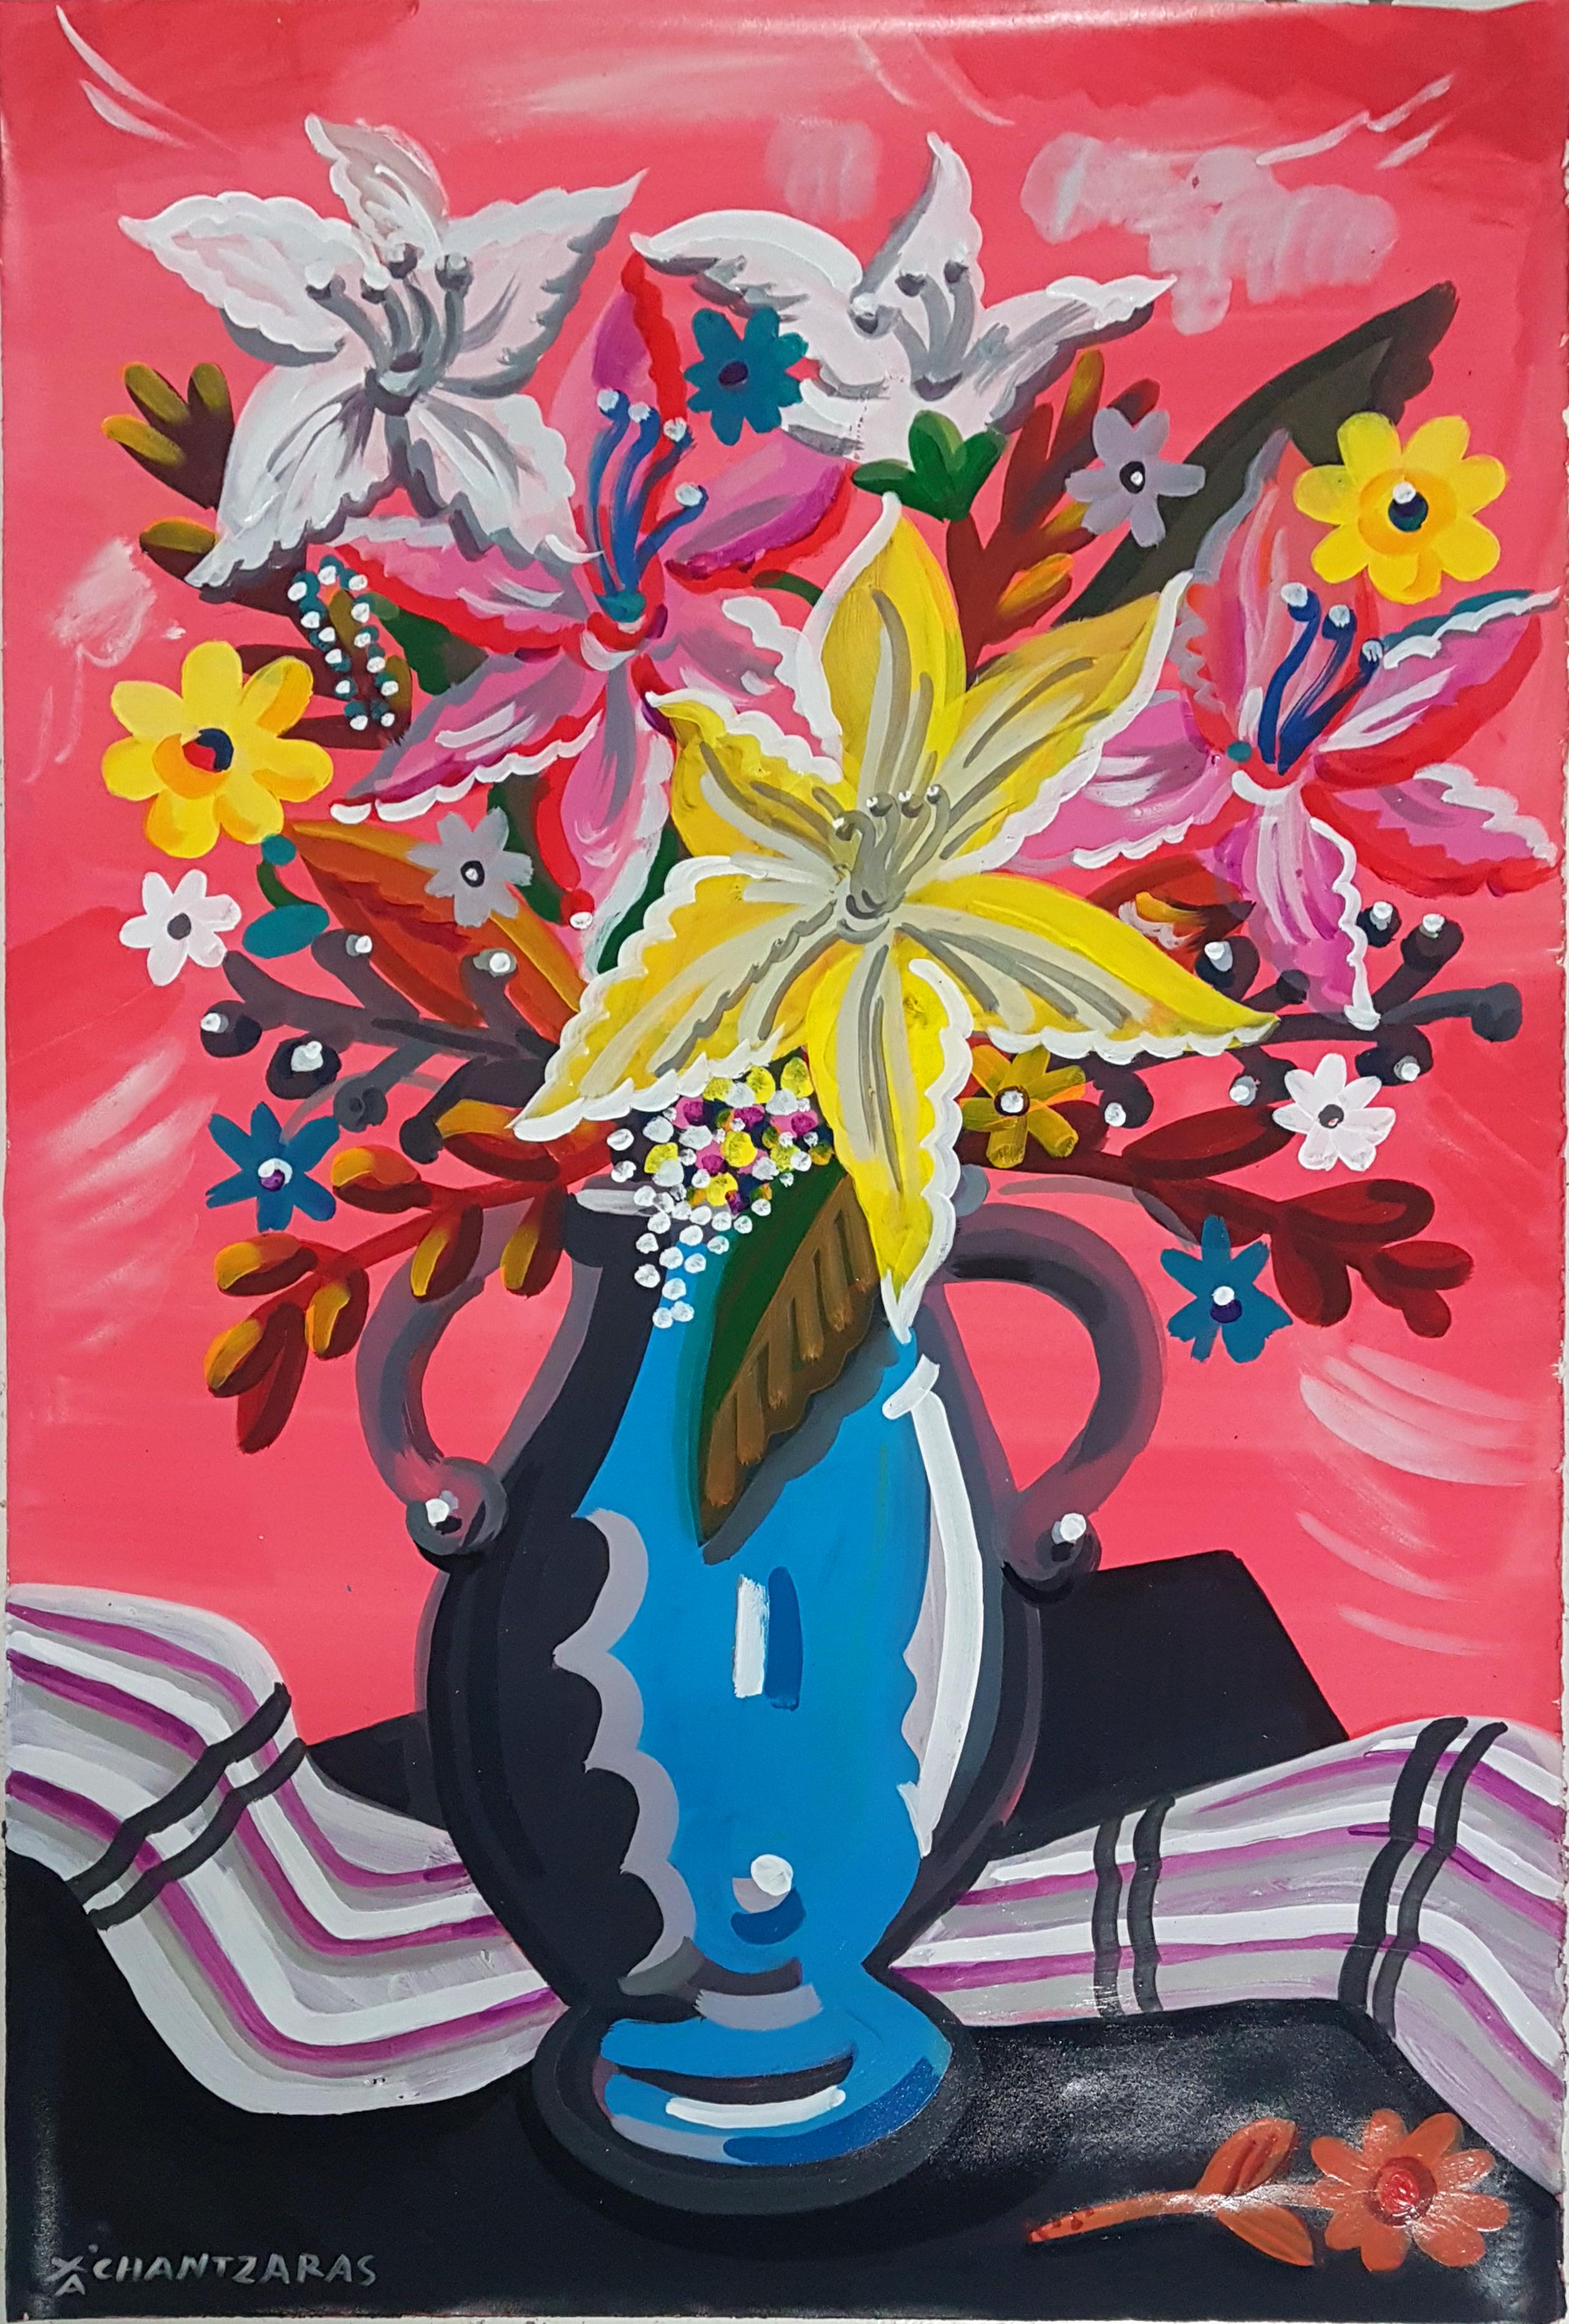 Apostolos Chantzaras Figurative Painting - A Spring in Her, mixed media painting on paper, contemporary bright flowers 